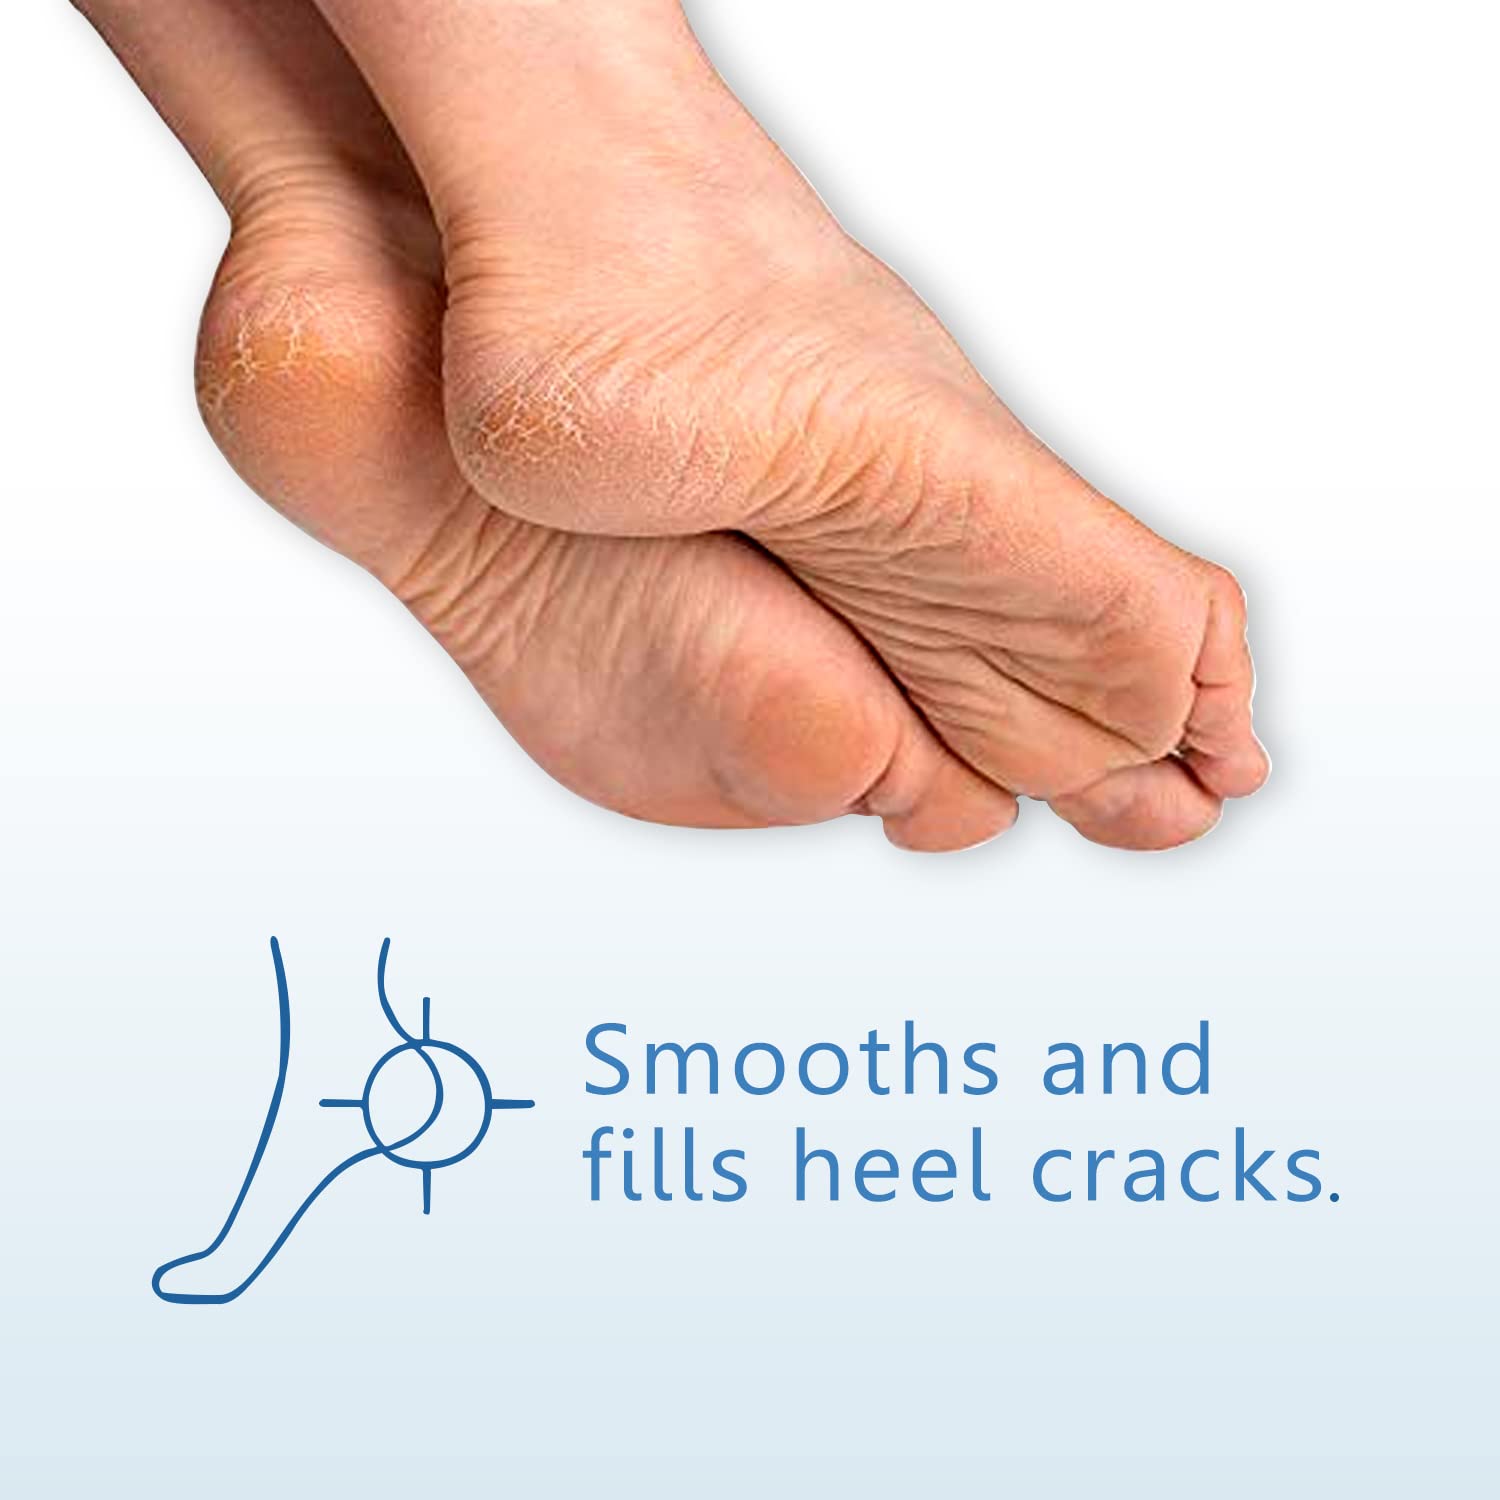 Cracked Heels - Causes, Symptoms and Natural Healing Methods